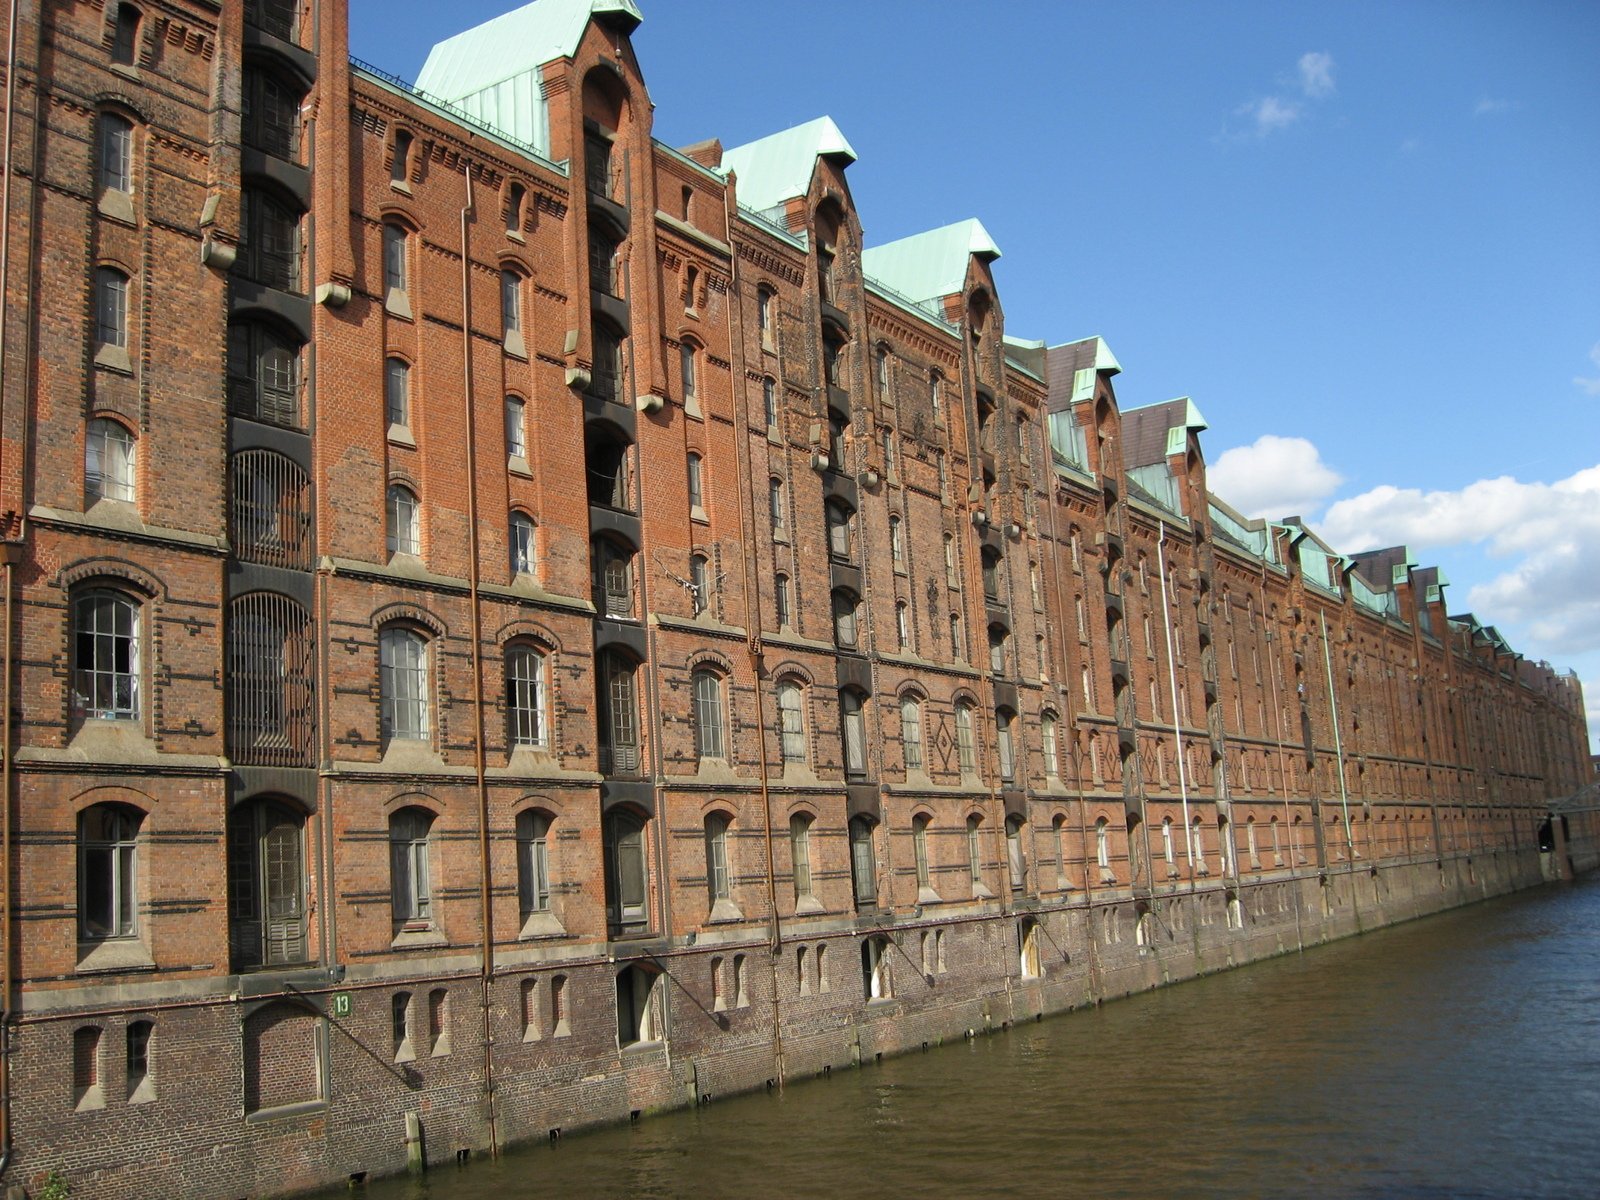 this is an image of large brick buildings on the side of a river